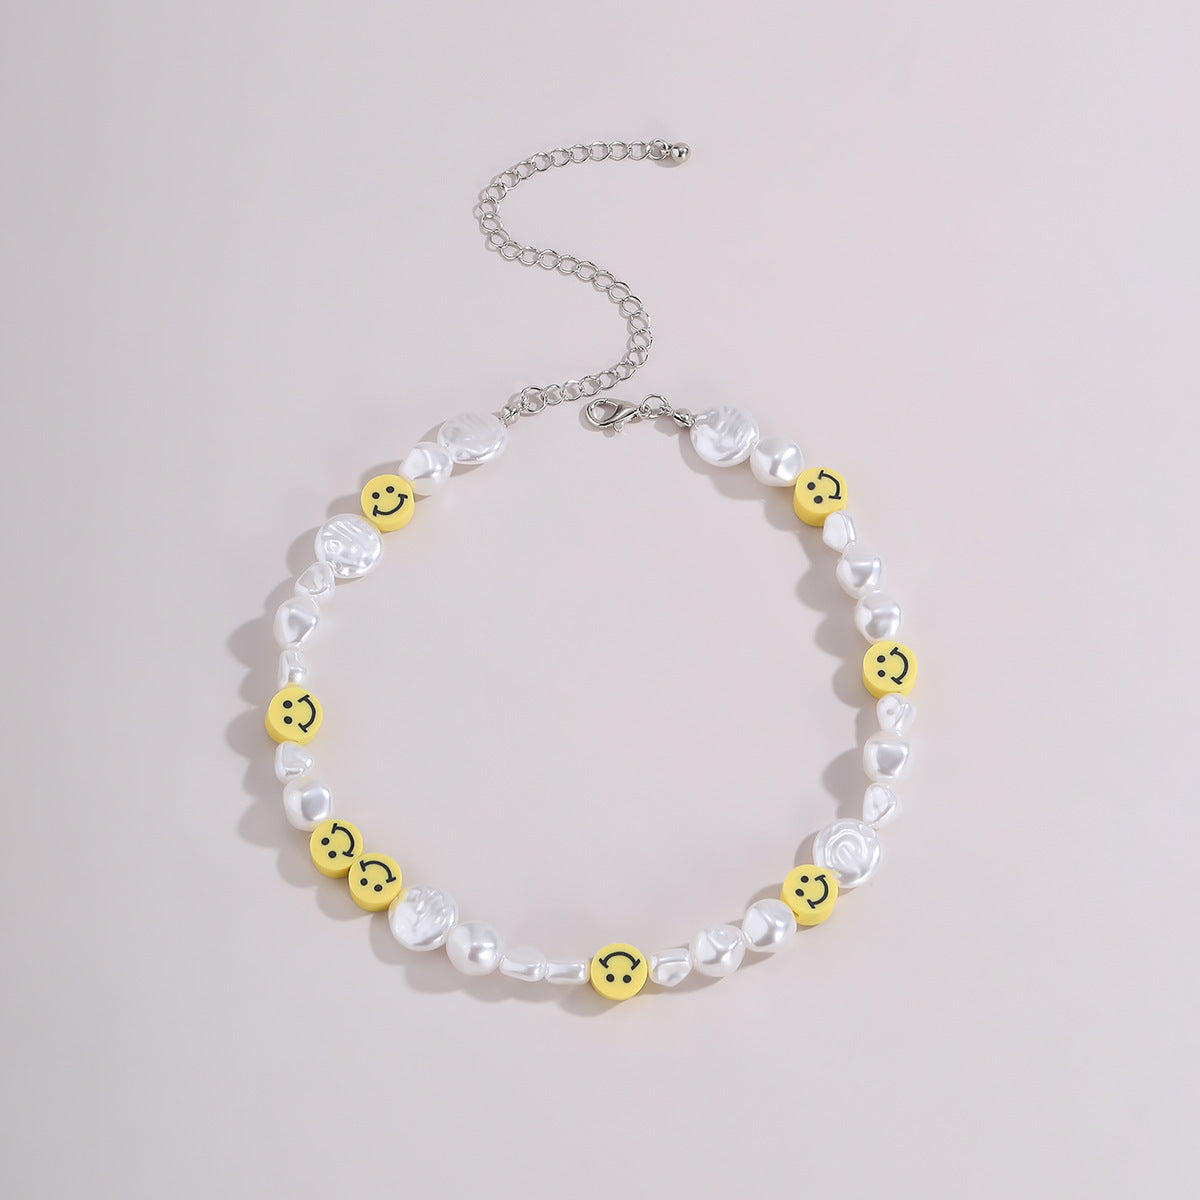 You can look cute and elegant in our Funky Pearl Smile Necklace! Cute girls necklace.